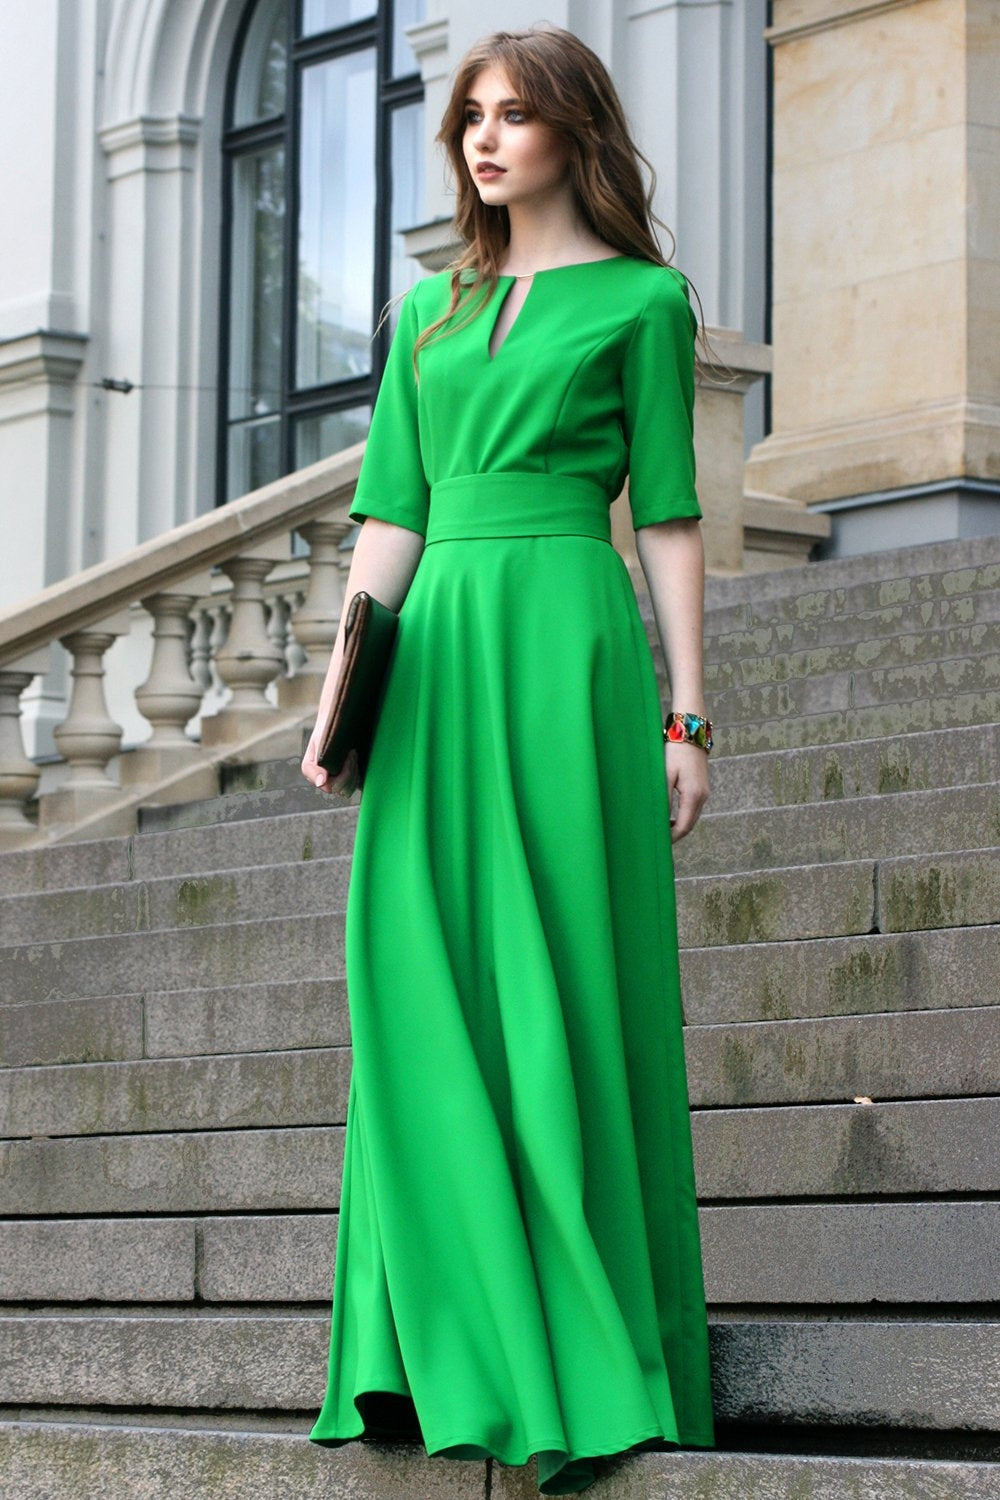 Green maxi dress with circle skirts. Golden color detail in neckline